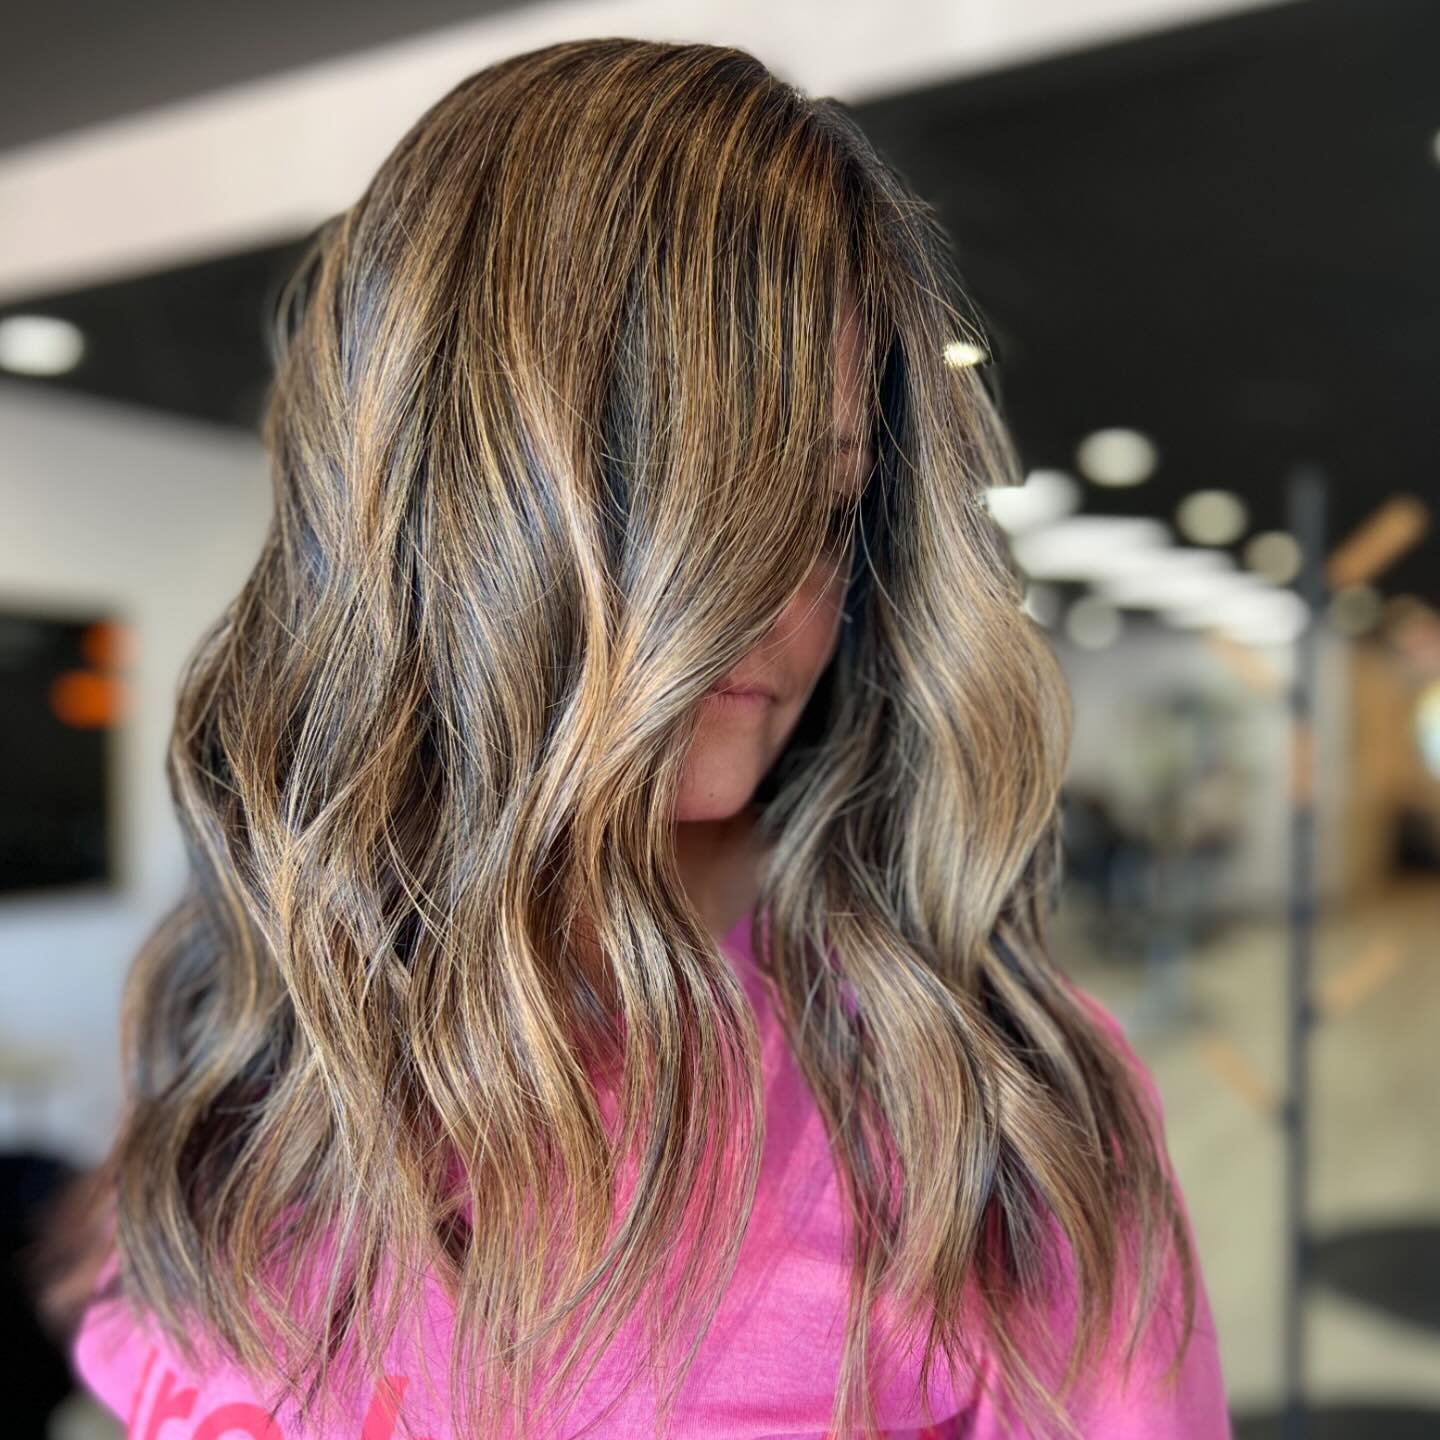 The wonderfully talented Alex of PRISM Hair, everyone and another gorgeous head of highlights, a fresh cut and waves! Alex&rsquo;s specialty is blended brightness with that lived in vibe 🪩

Wanna book with Alex? Text 804-806-0604 today or book onlin